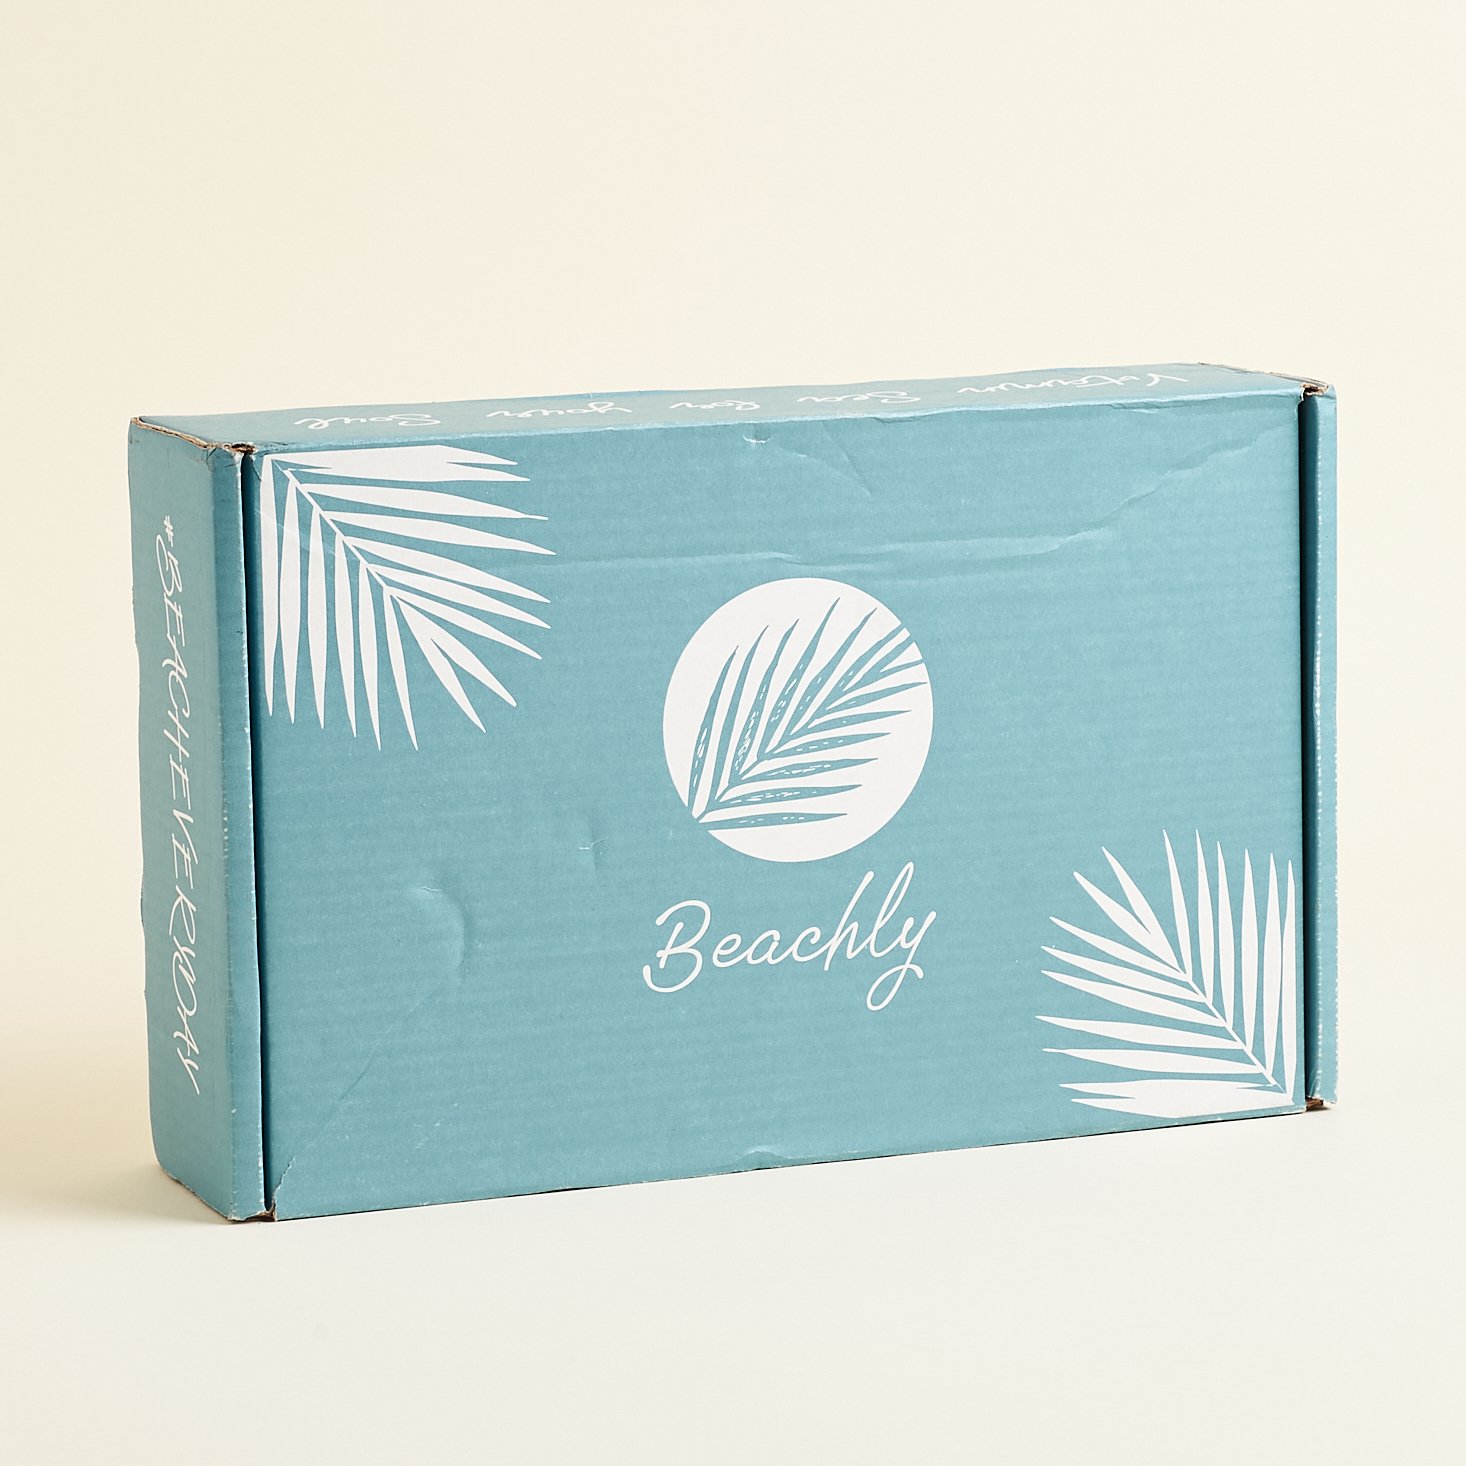 Beachly Fall Editor’s Box Available Now + Full Spoilers!